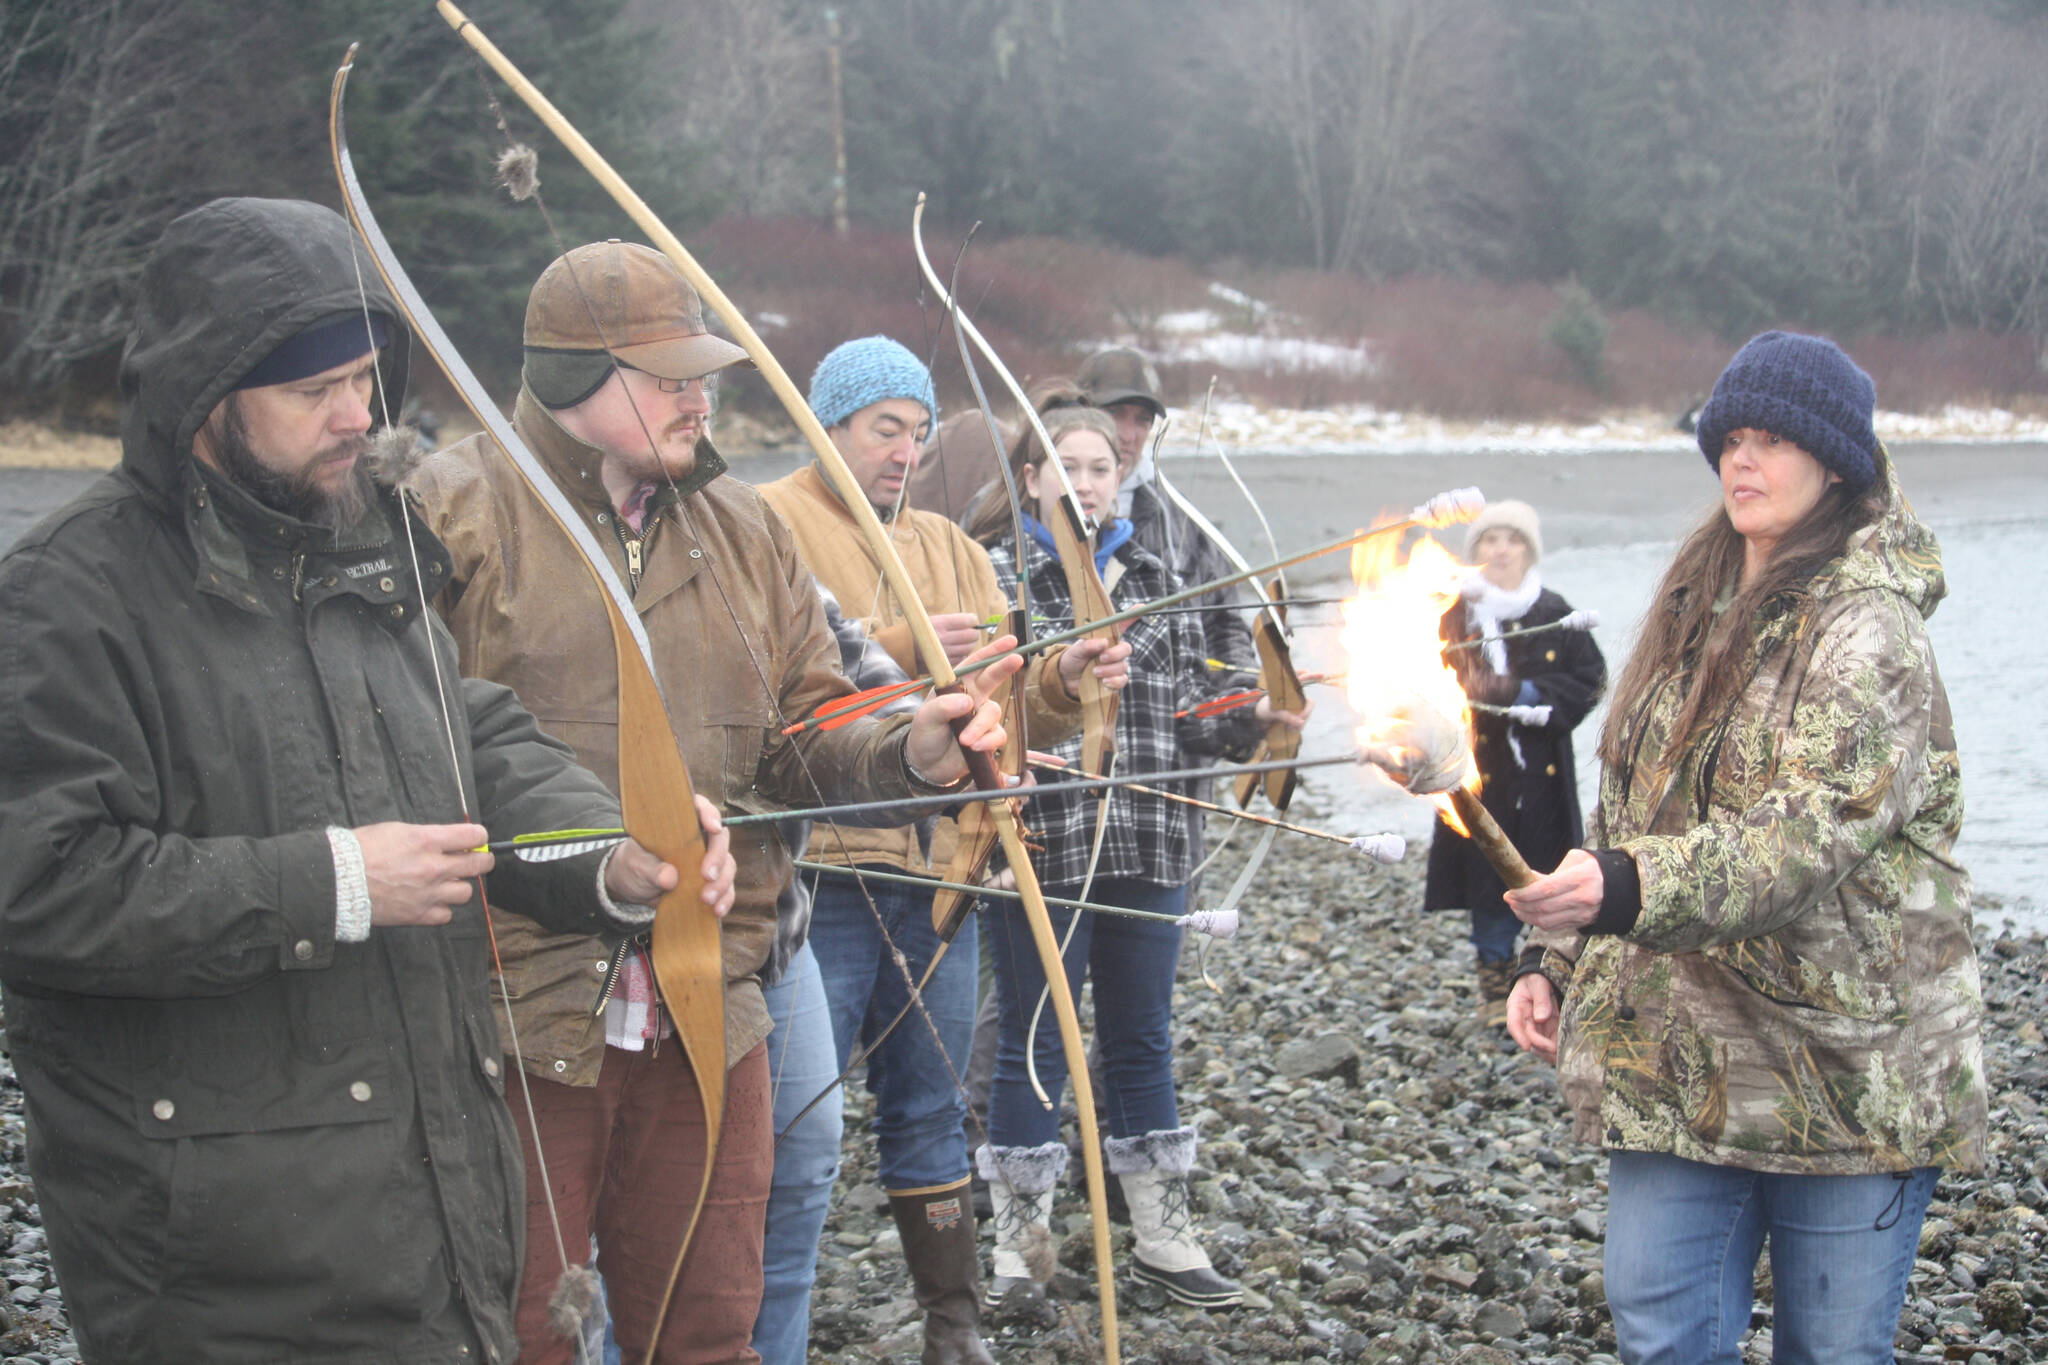 Jenna Cameron lights a row of arrows to pay tribute to her uncle Daniel Sargent during his memorial on Saturday at Raven Shelter. (Jonson Kuhn / Juneau Empire)